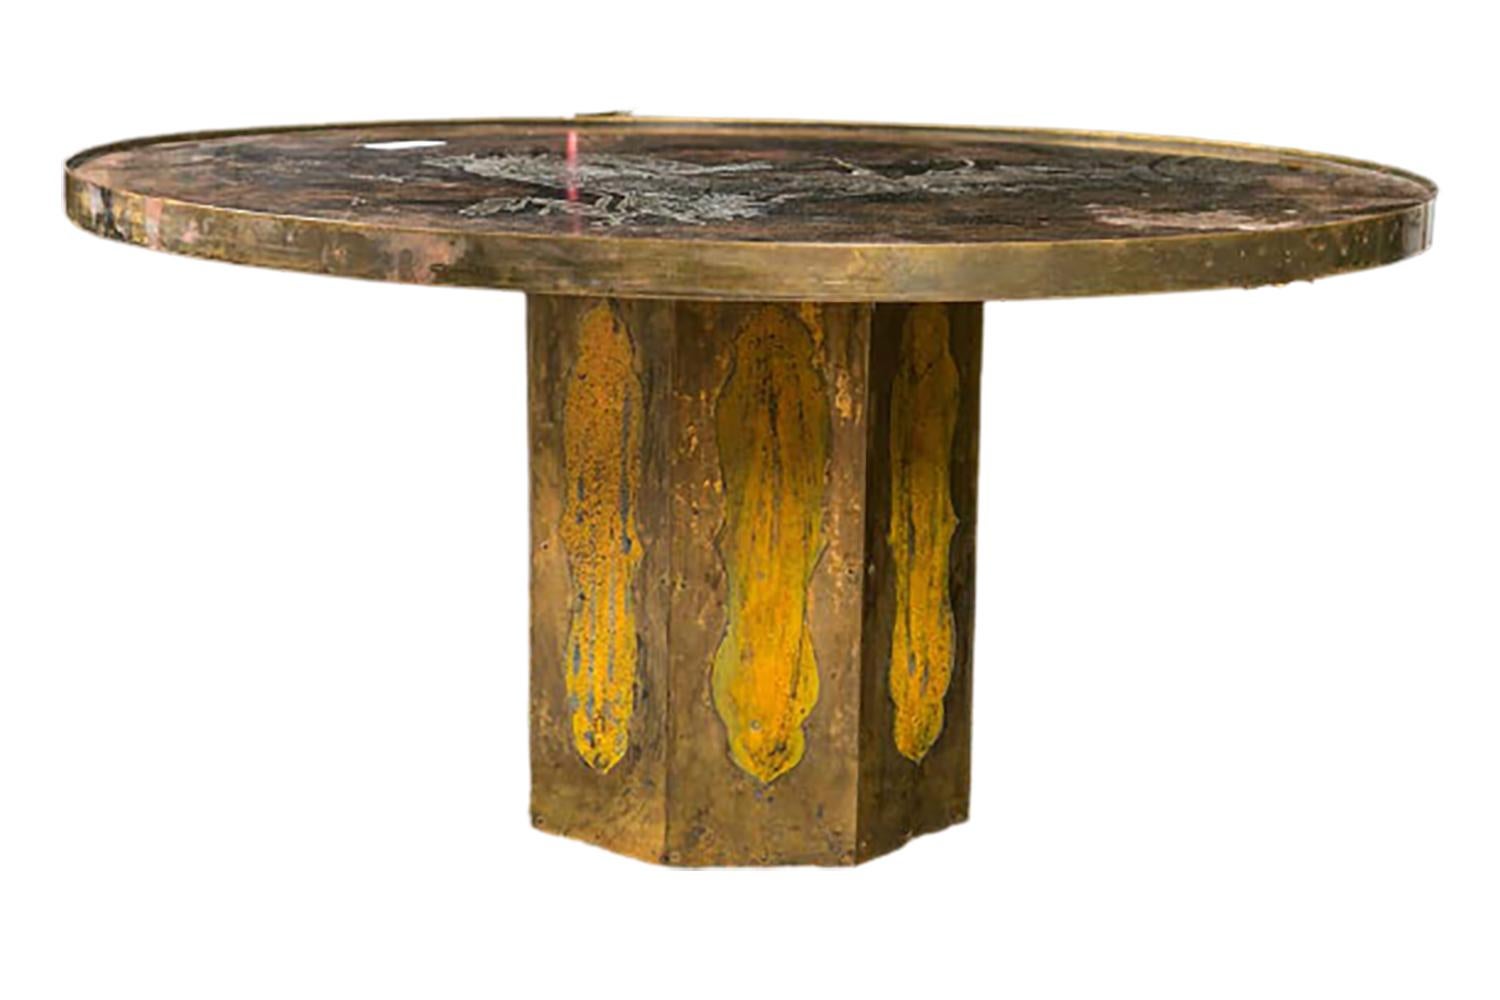 Philip LaVerne (1908-1998) and Kelvin LaVerne (b. 1936) Chan coffee table, New York, circa 1960s patinated and enameled bronze and pewter. Asian decorated top on an octagonal base. Acid-etched and enameled patinated brass over pewter over wood 18